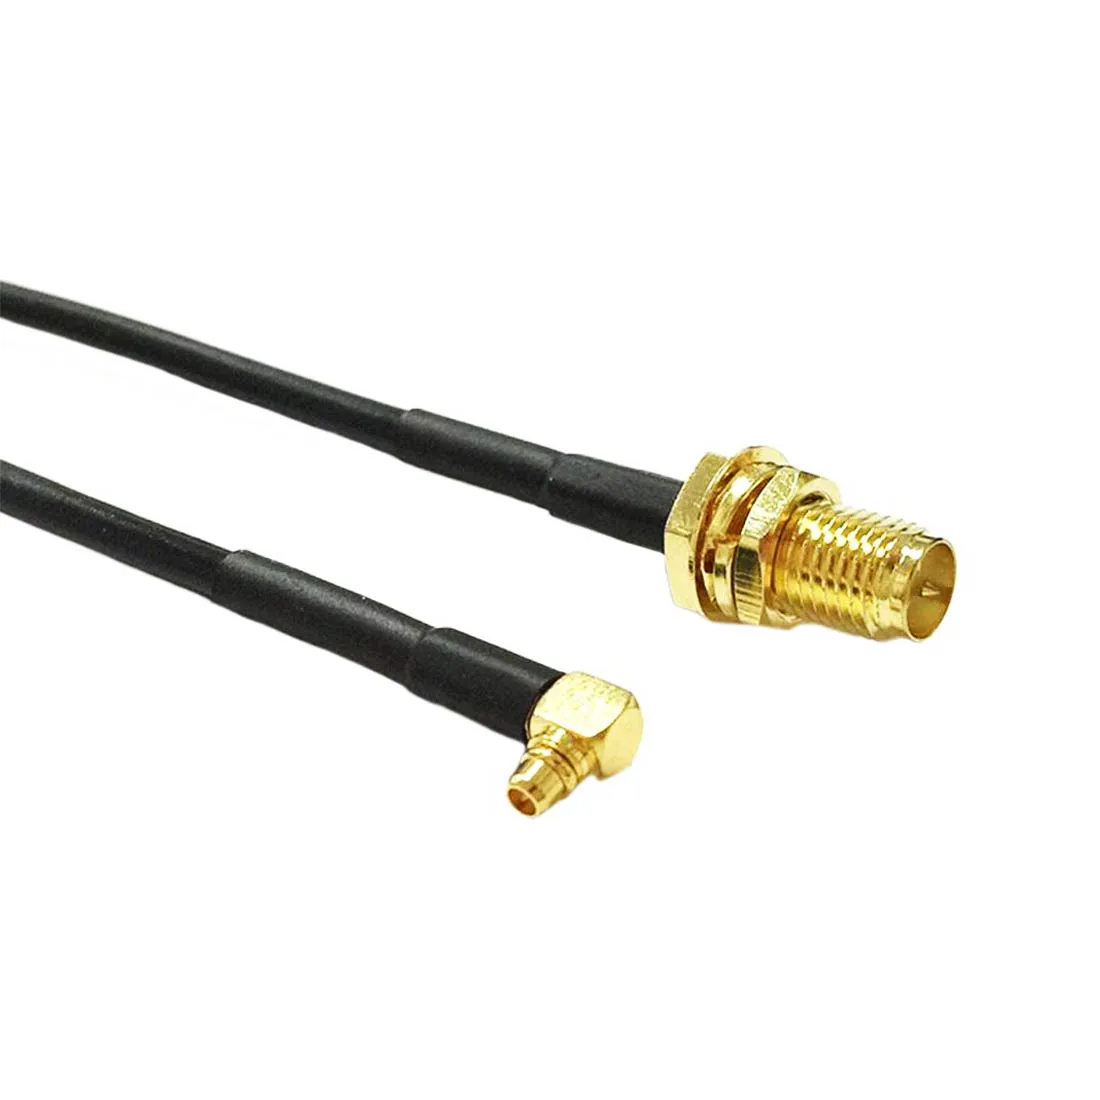 New Modem Coaxial Cable RP-SMA Female Jack Nut Switch MMCX Male Plug Right Angle Connector RG174 Cable 15cm 6inch Adapter 6 35 6 5mm 2core elbow right angle guitar effect pedal connector mono amplifier microphone jack plug diy welding audio plug